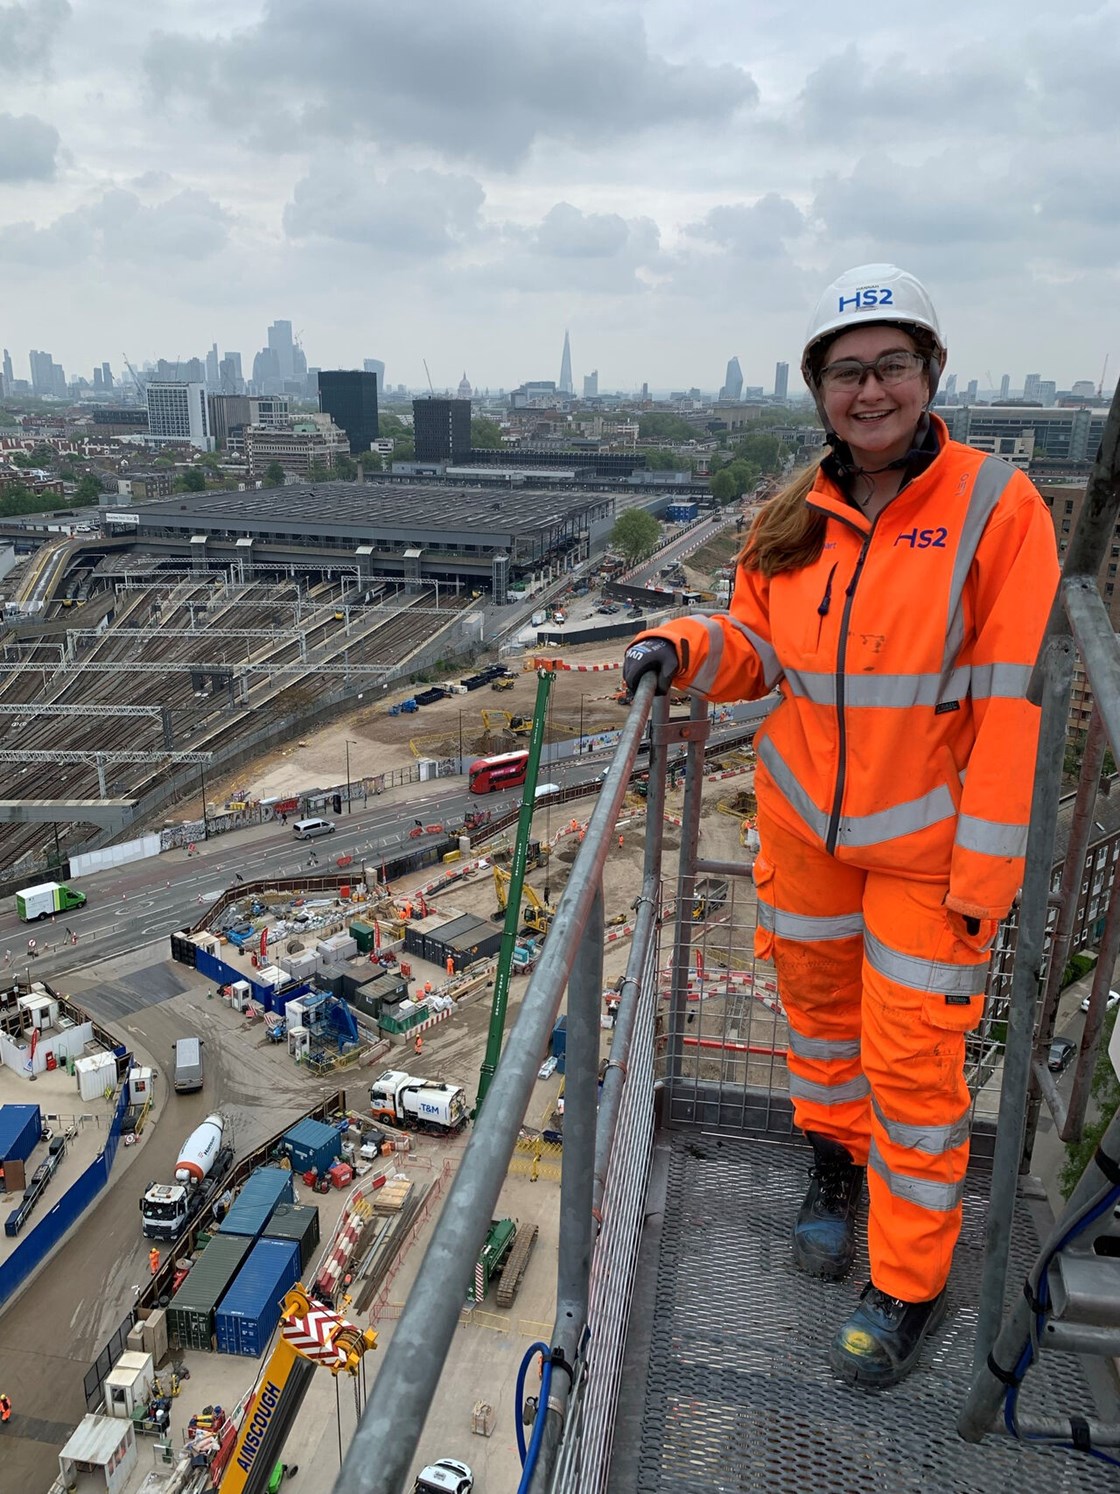 Hannah pictured standing next to the construction of HS2's new station at London Euston